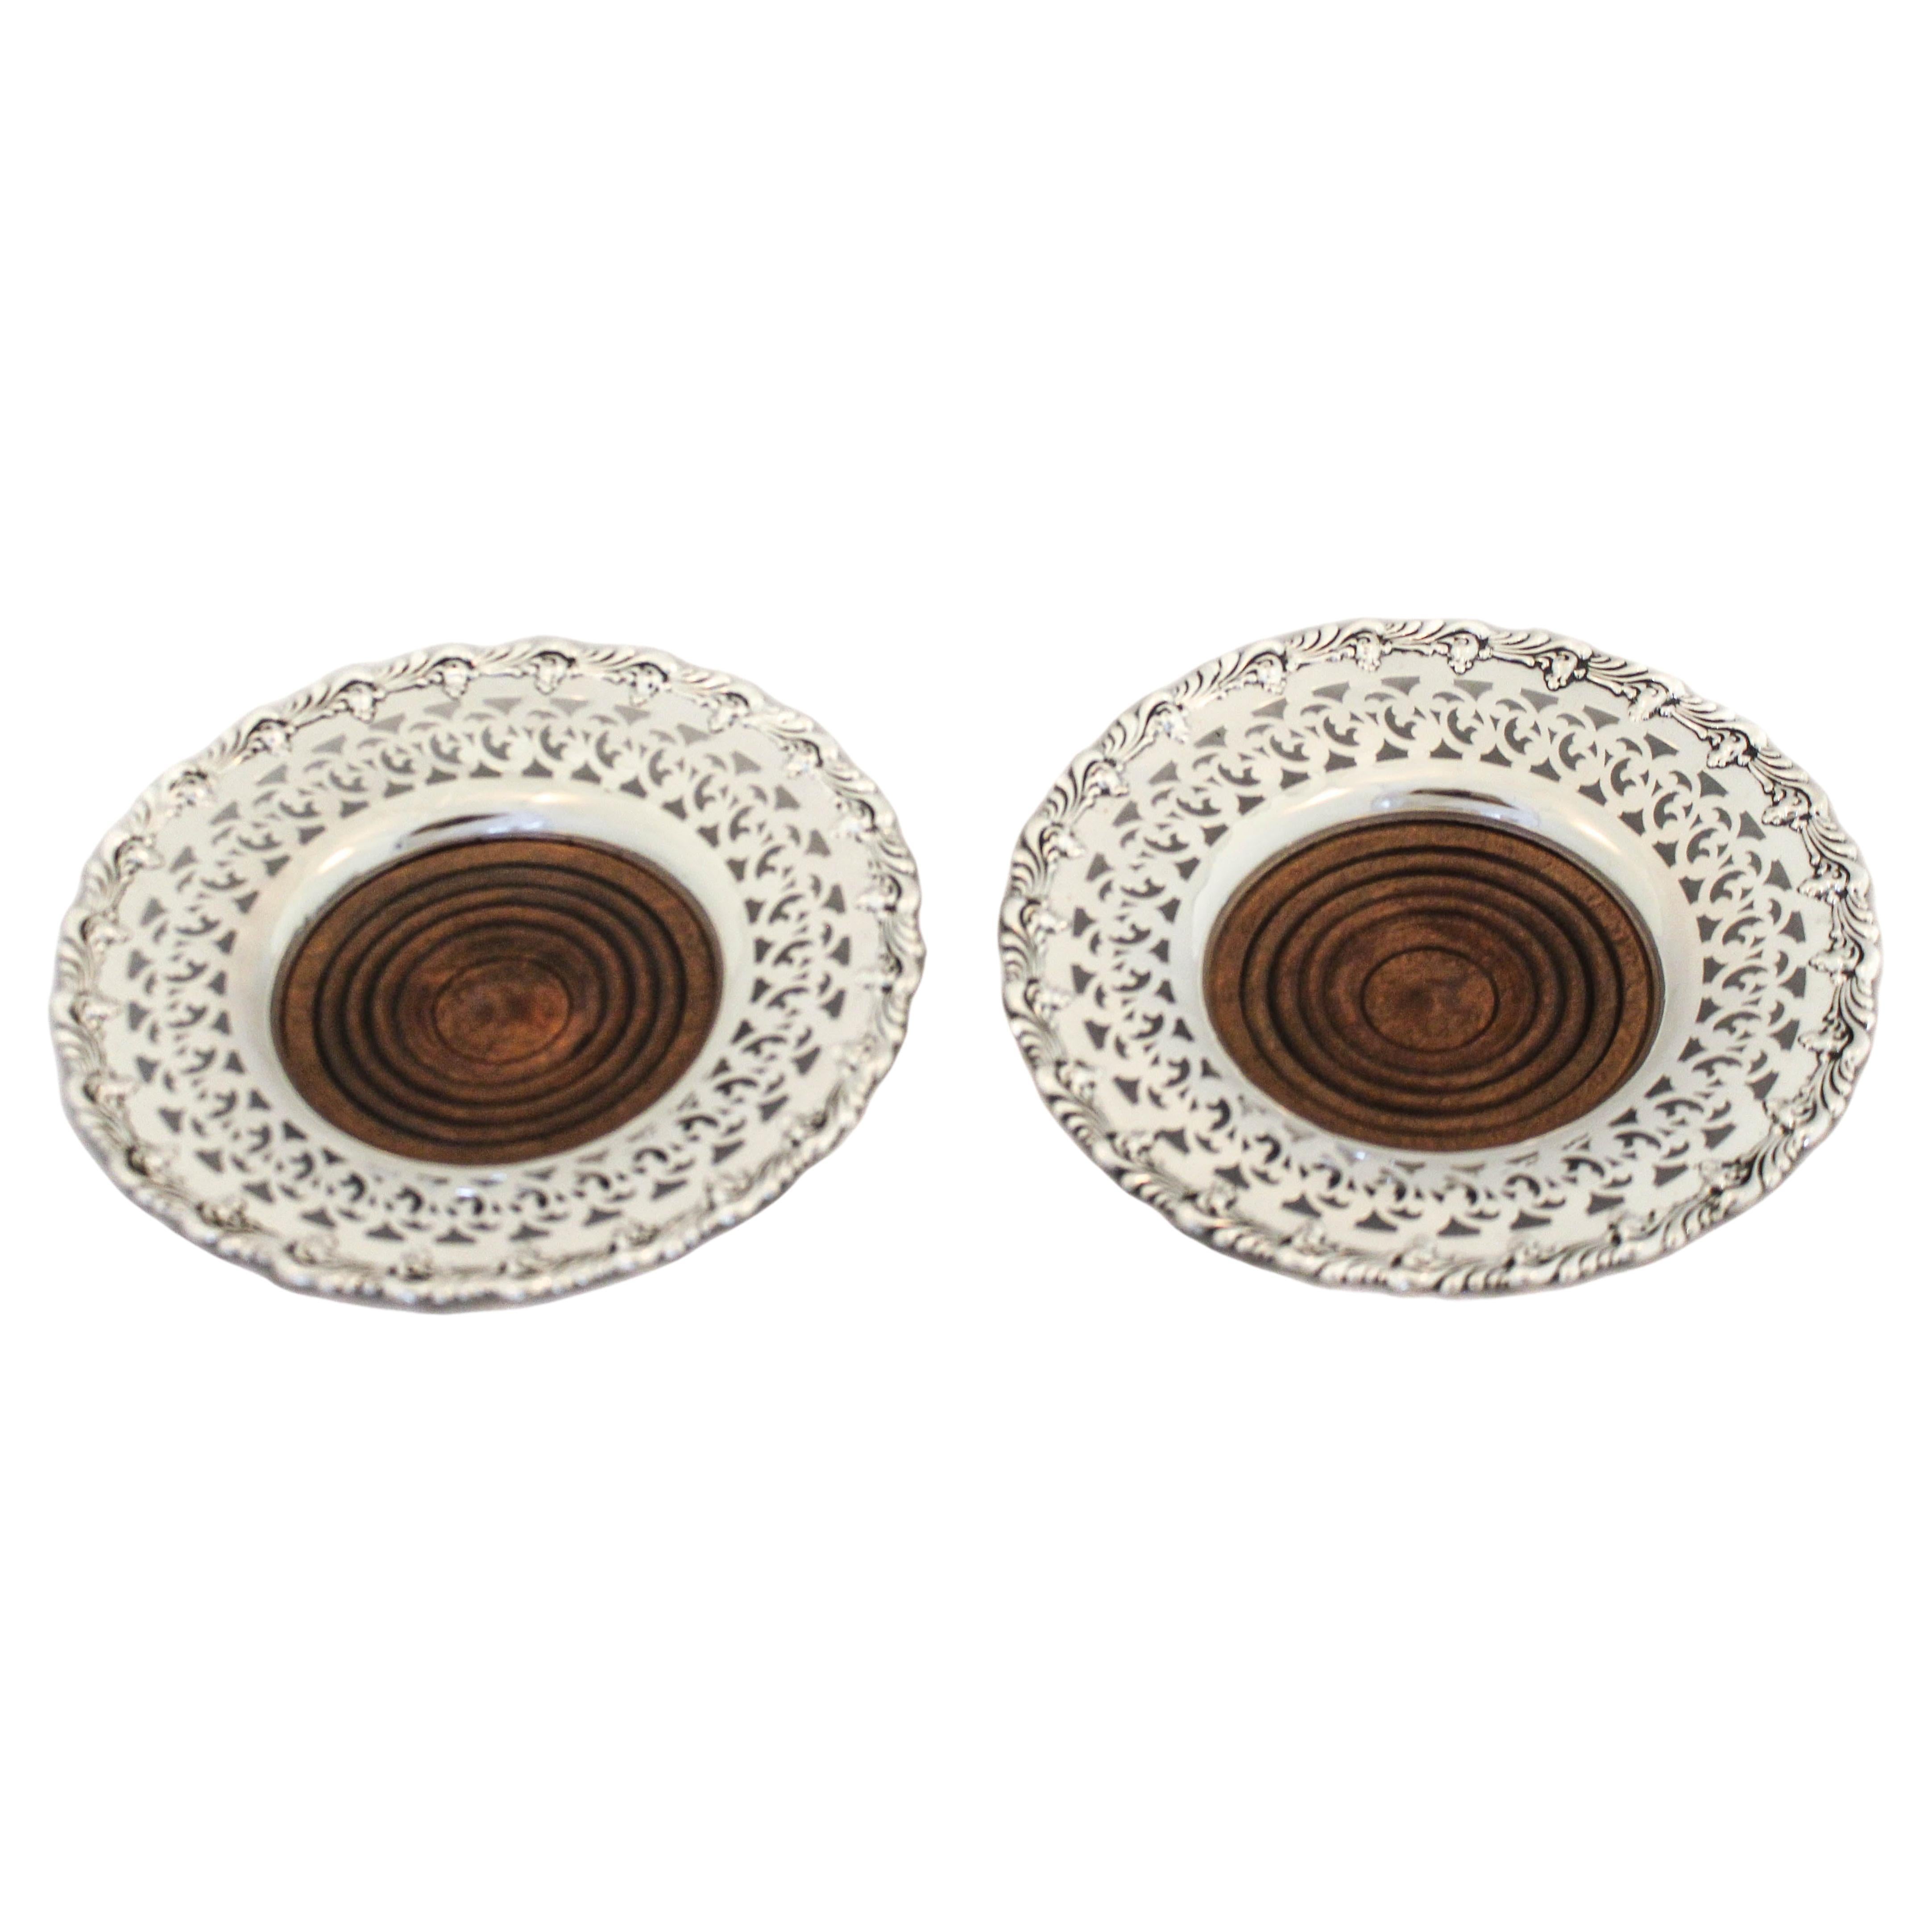 Pair of Sterling Silver Wine Coasters